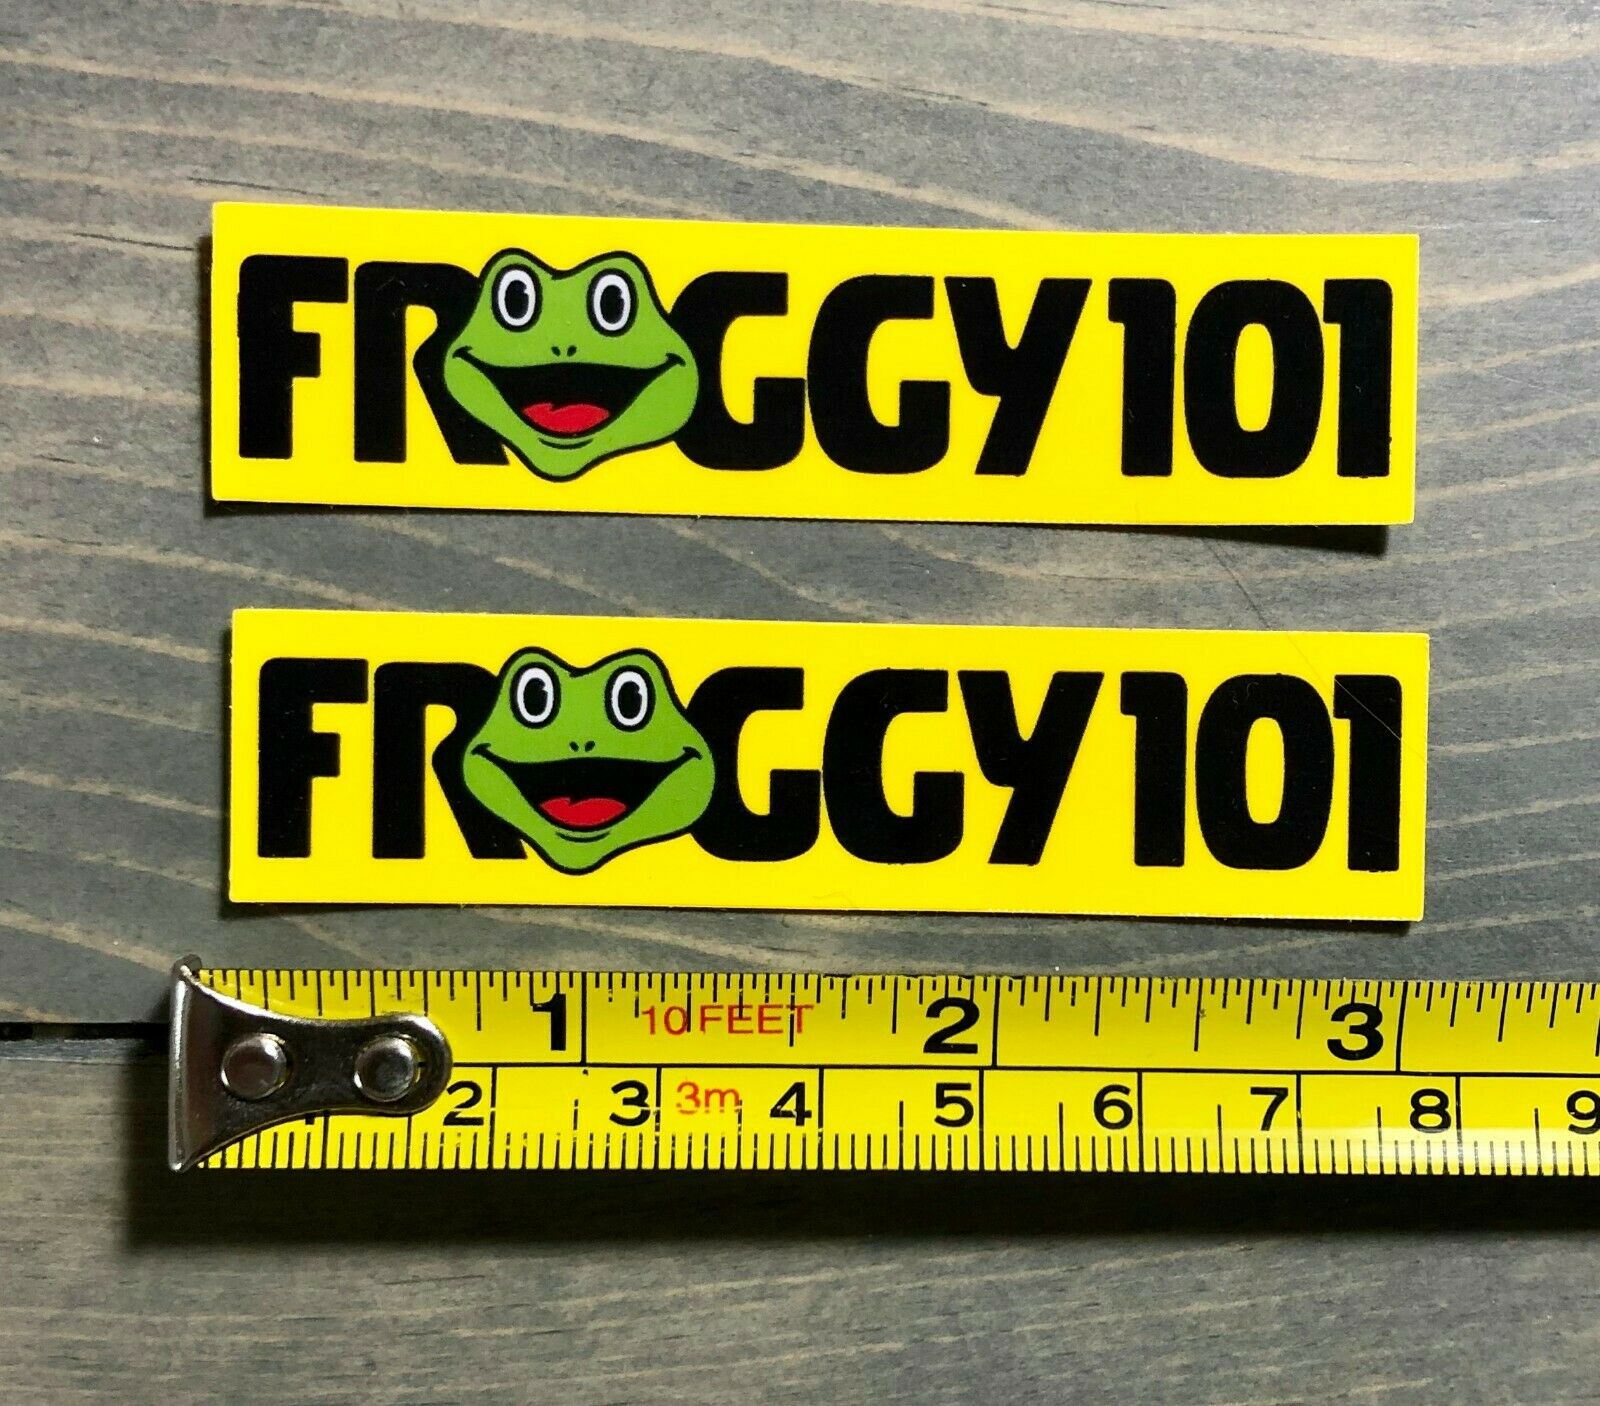 2 Froggy 101 Sticker SMALL Decal 3